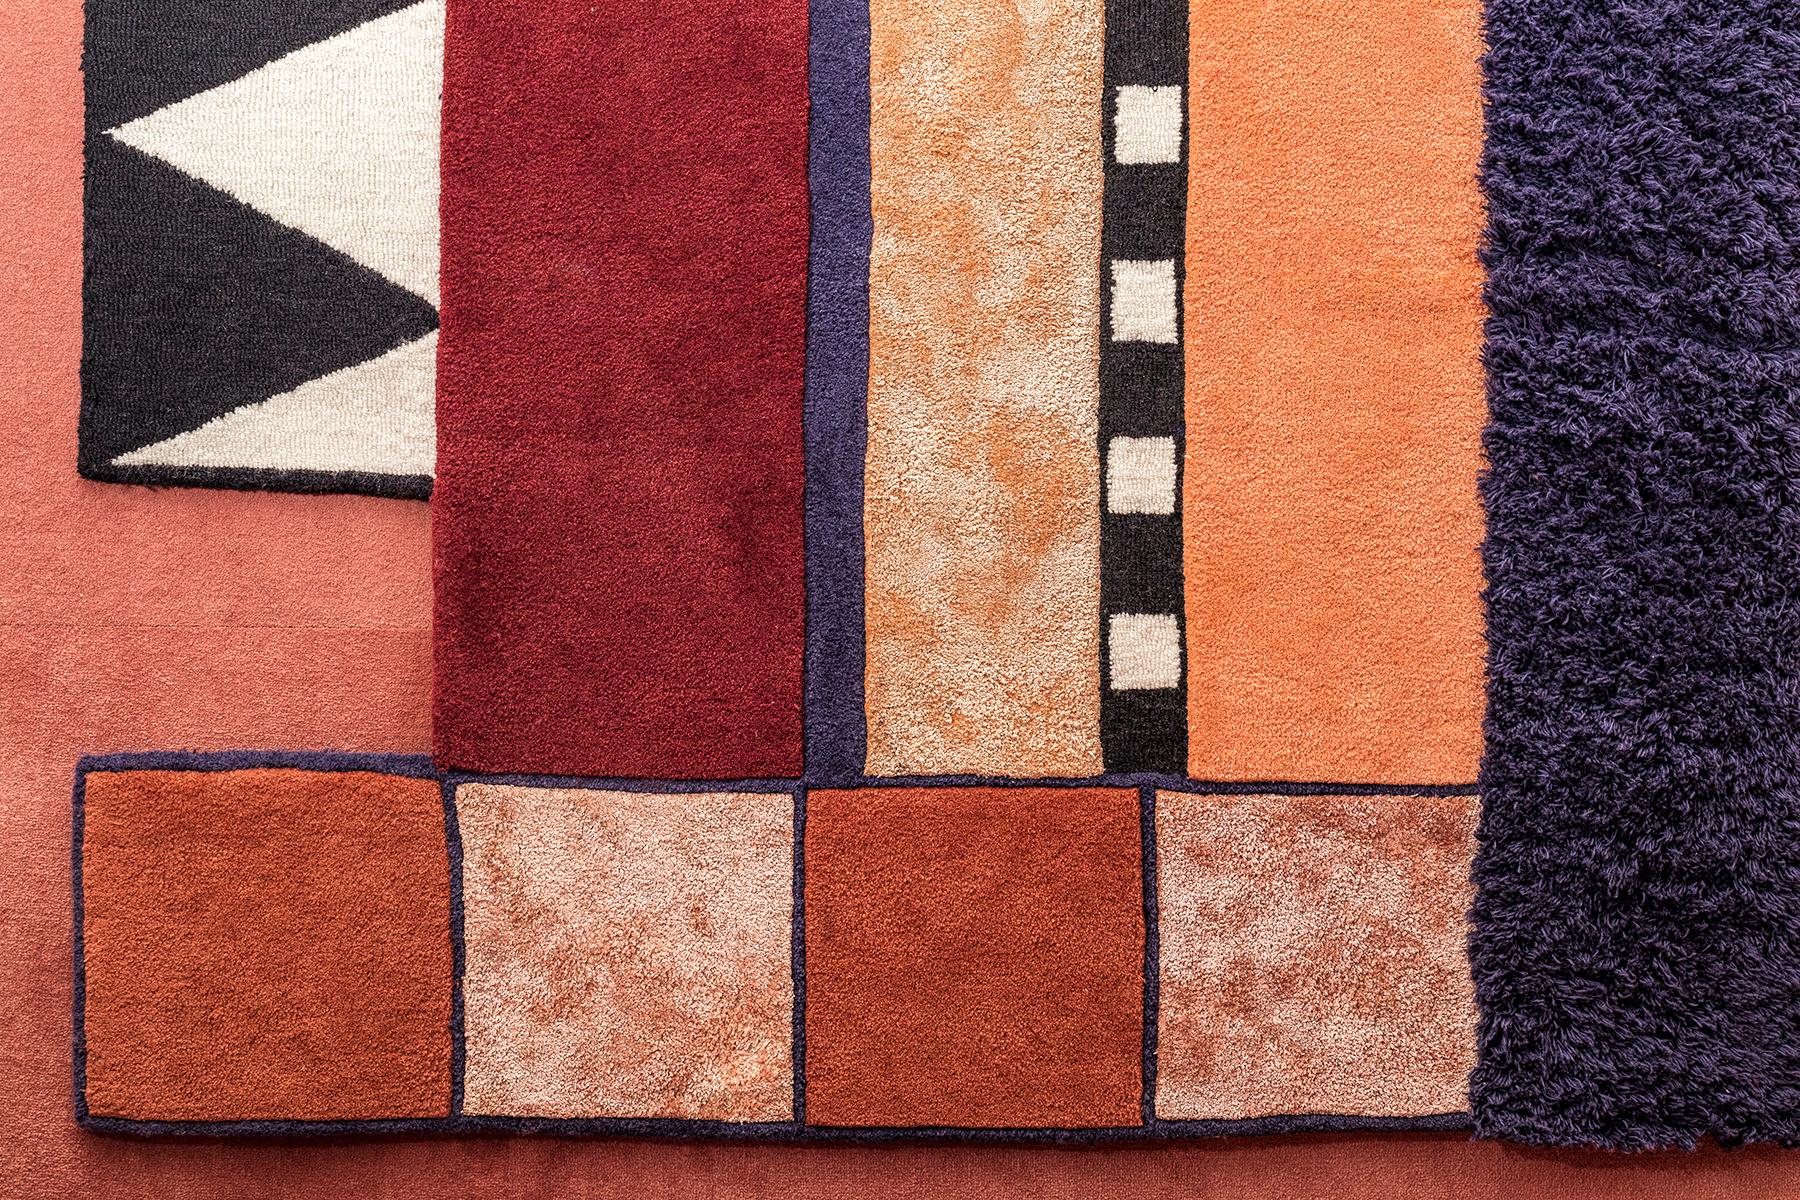 The Crest II track tapestry rug draws inspiration from the tracks run by athletes in ancient Olympic Games. Mixed neutrals and geometric patterns create a bold, edgy vibe. This rug is hand-tufted in India, made with wool, silk, and shag. Can be